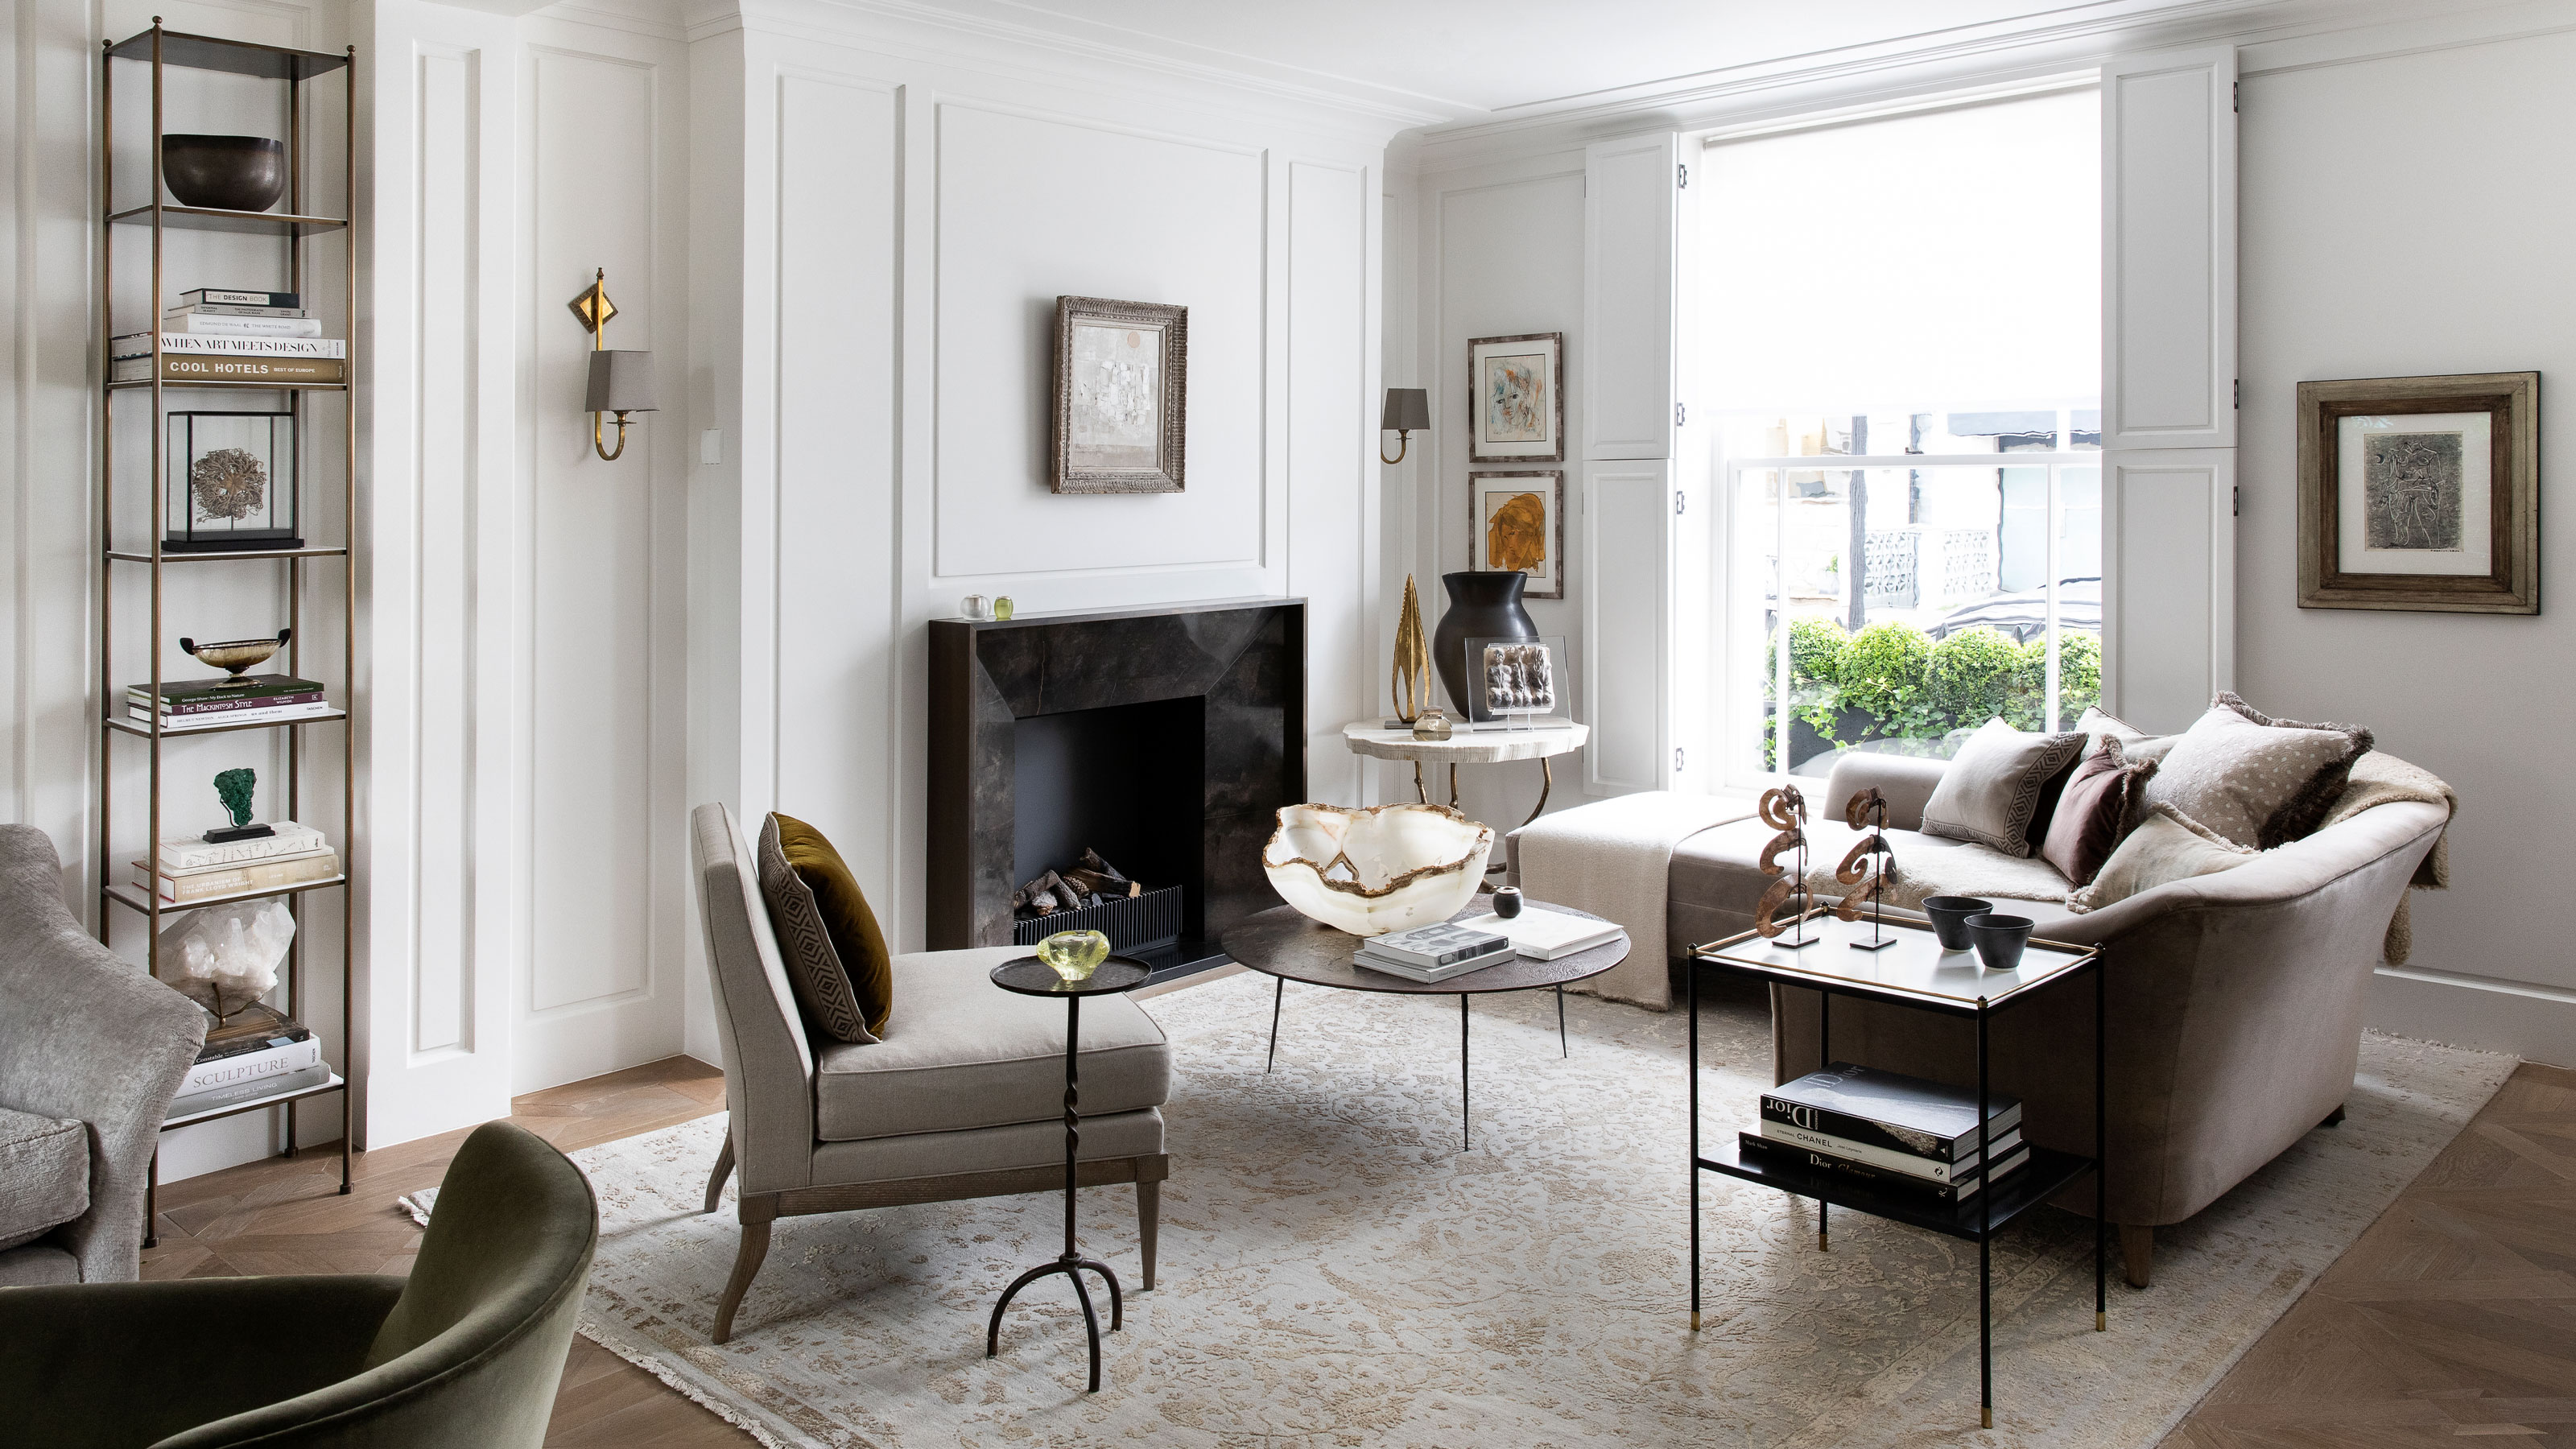 The Perfect White Paint: How to Choose One Without Going Crazy